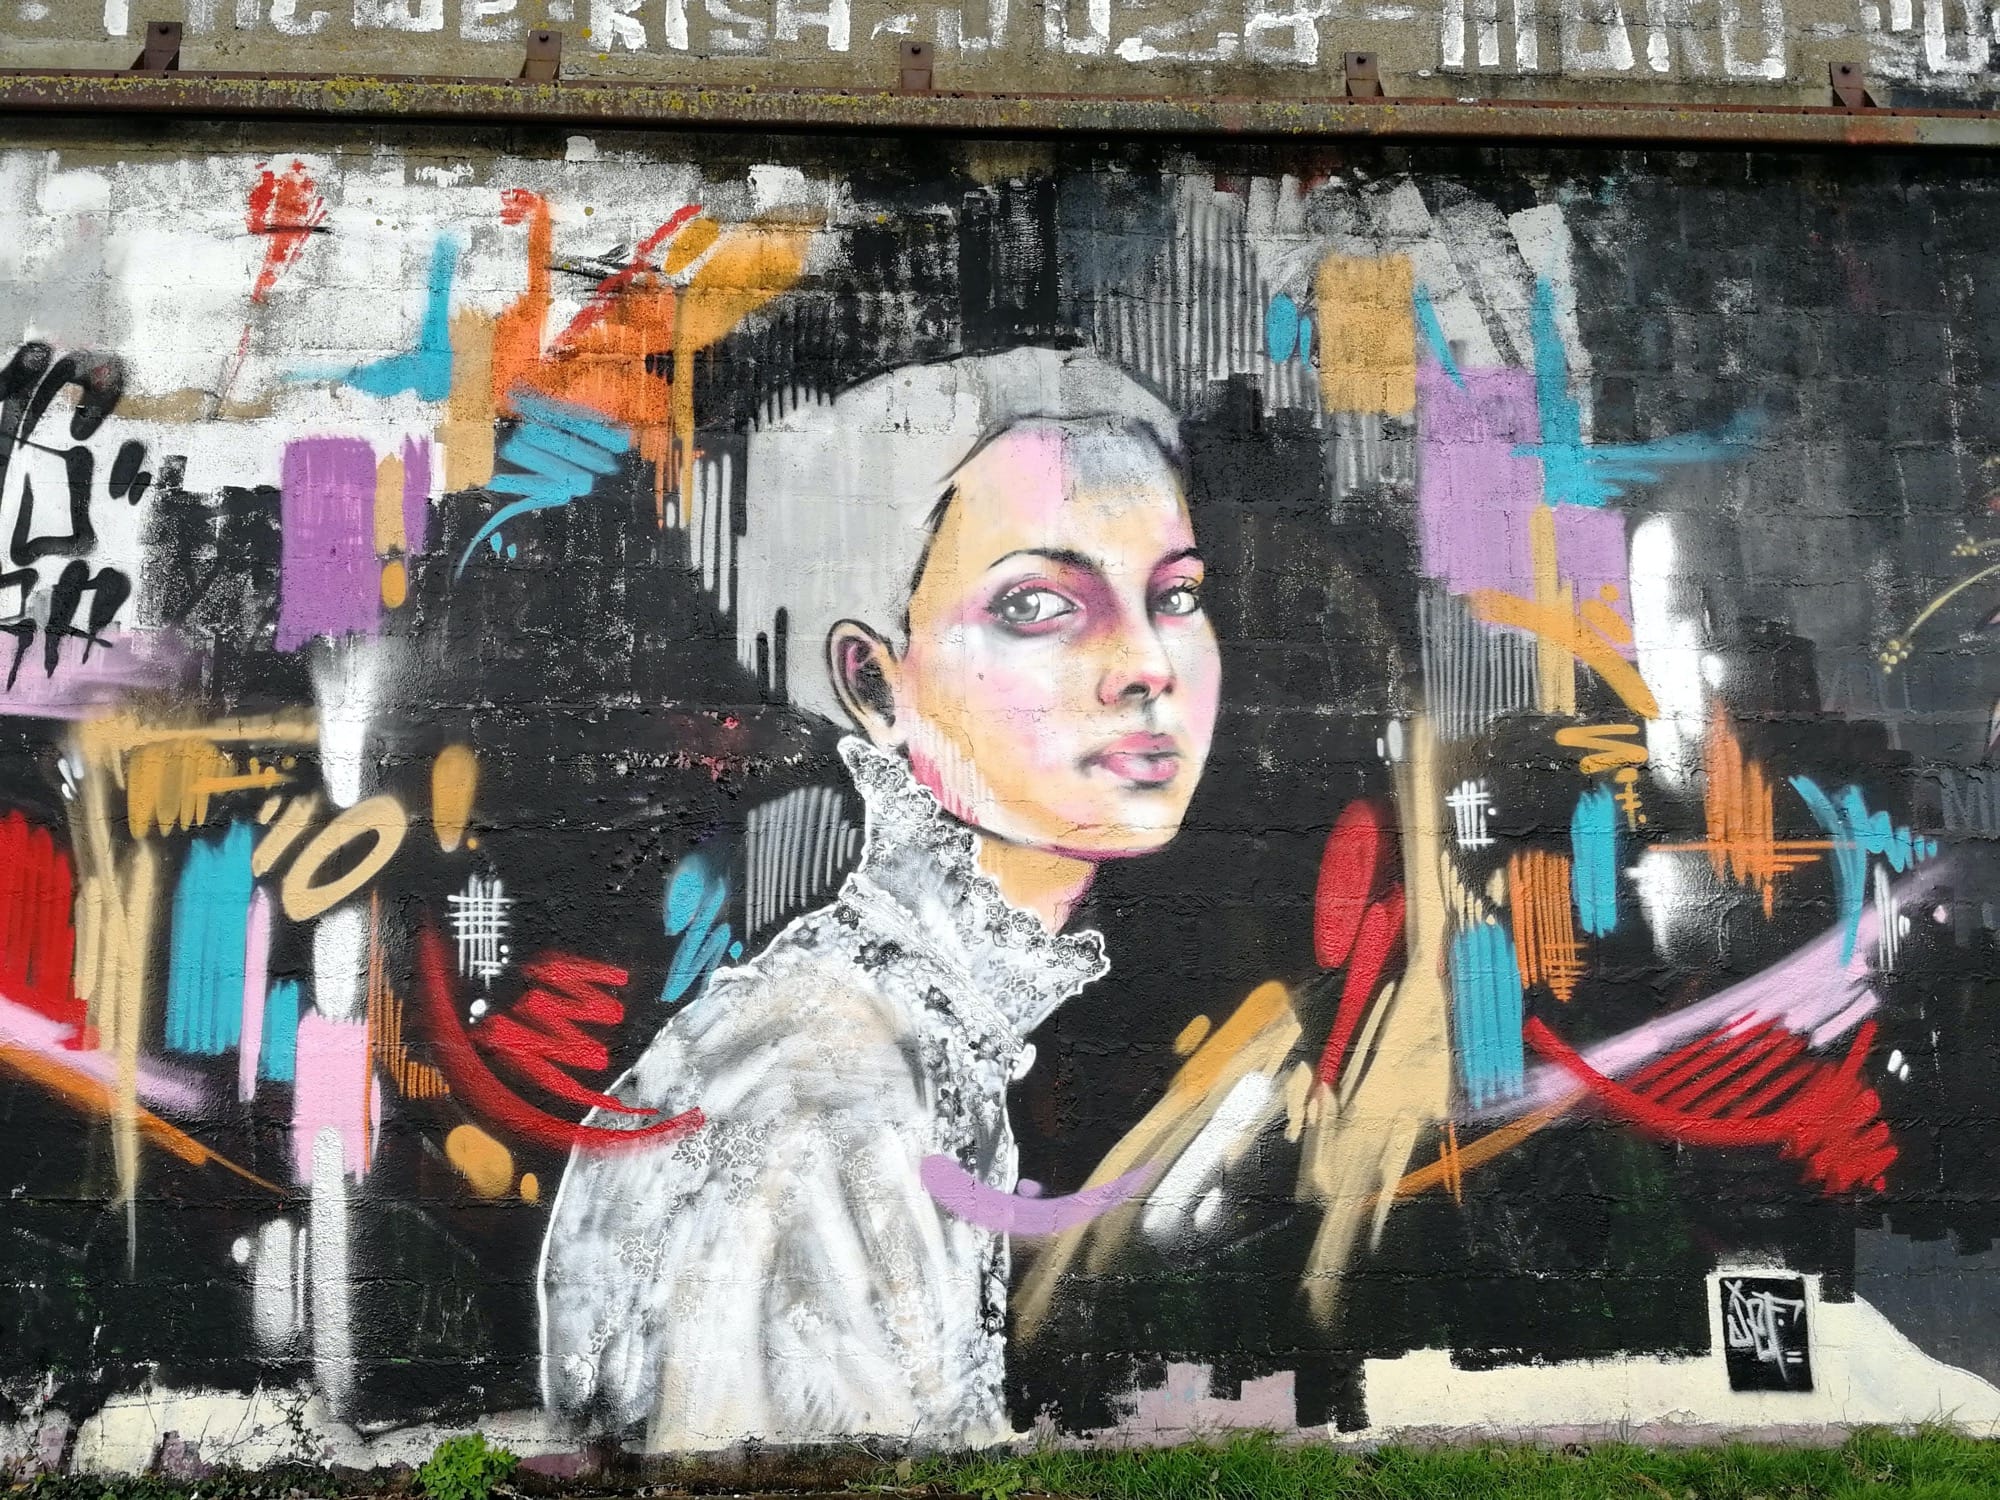 Graffiti 1206  by the artist Jef captured by Rabot in Redon France